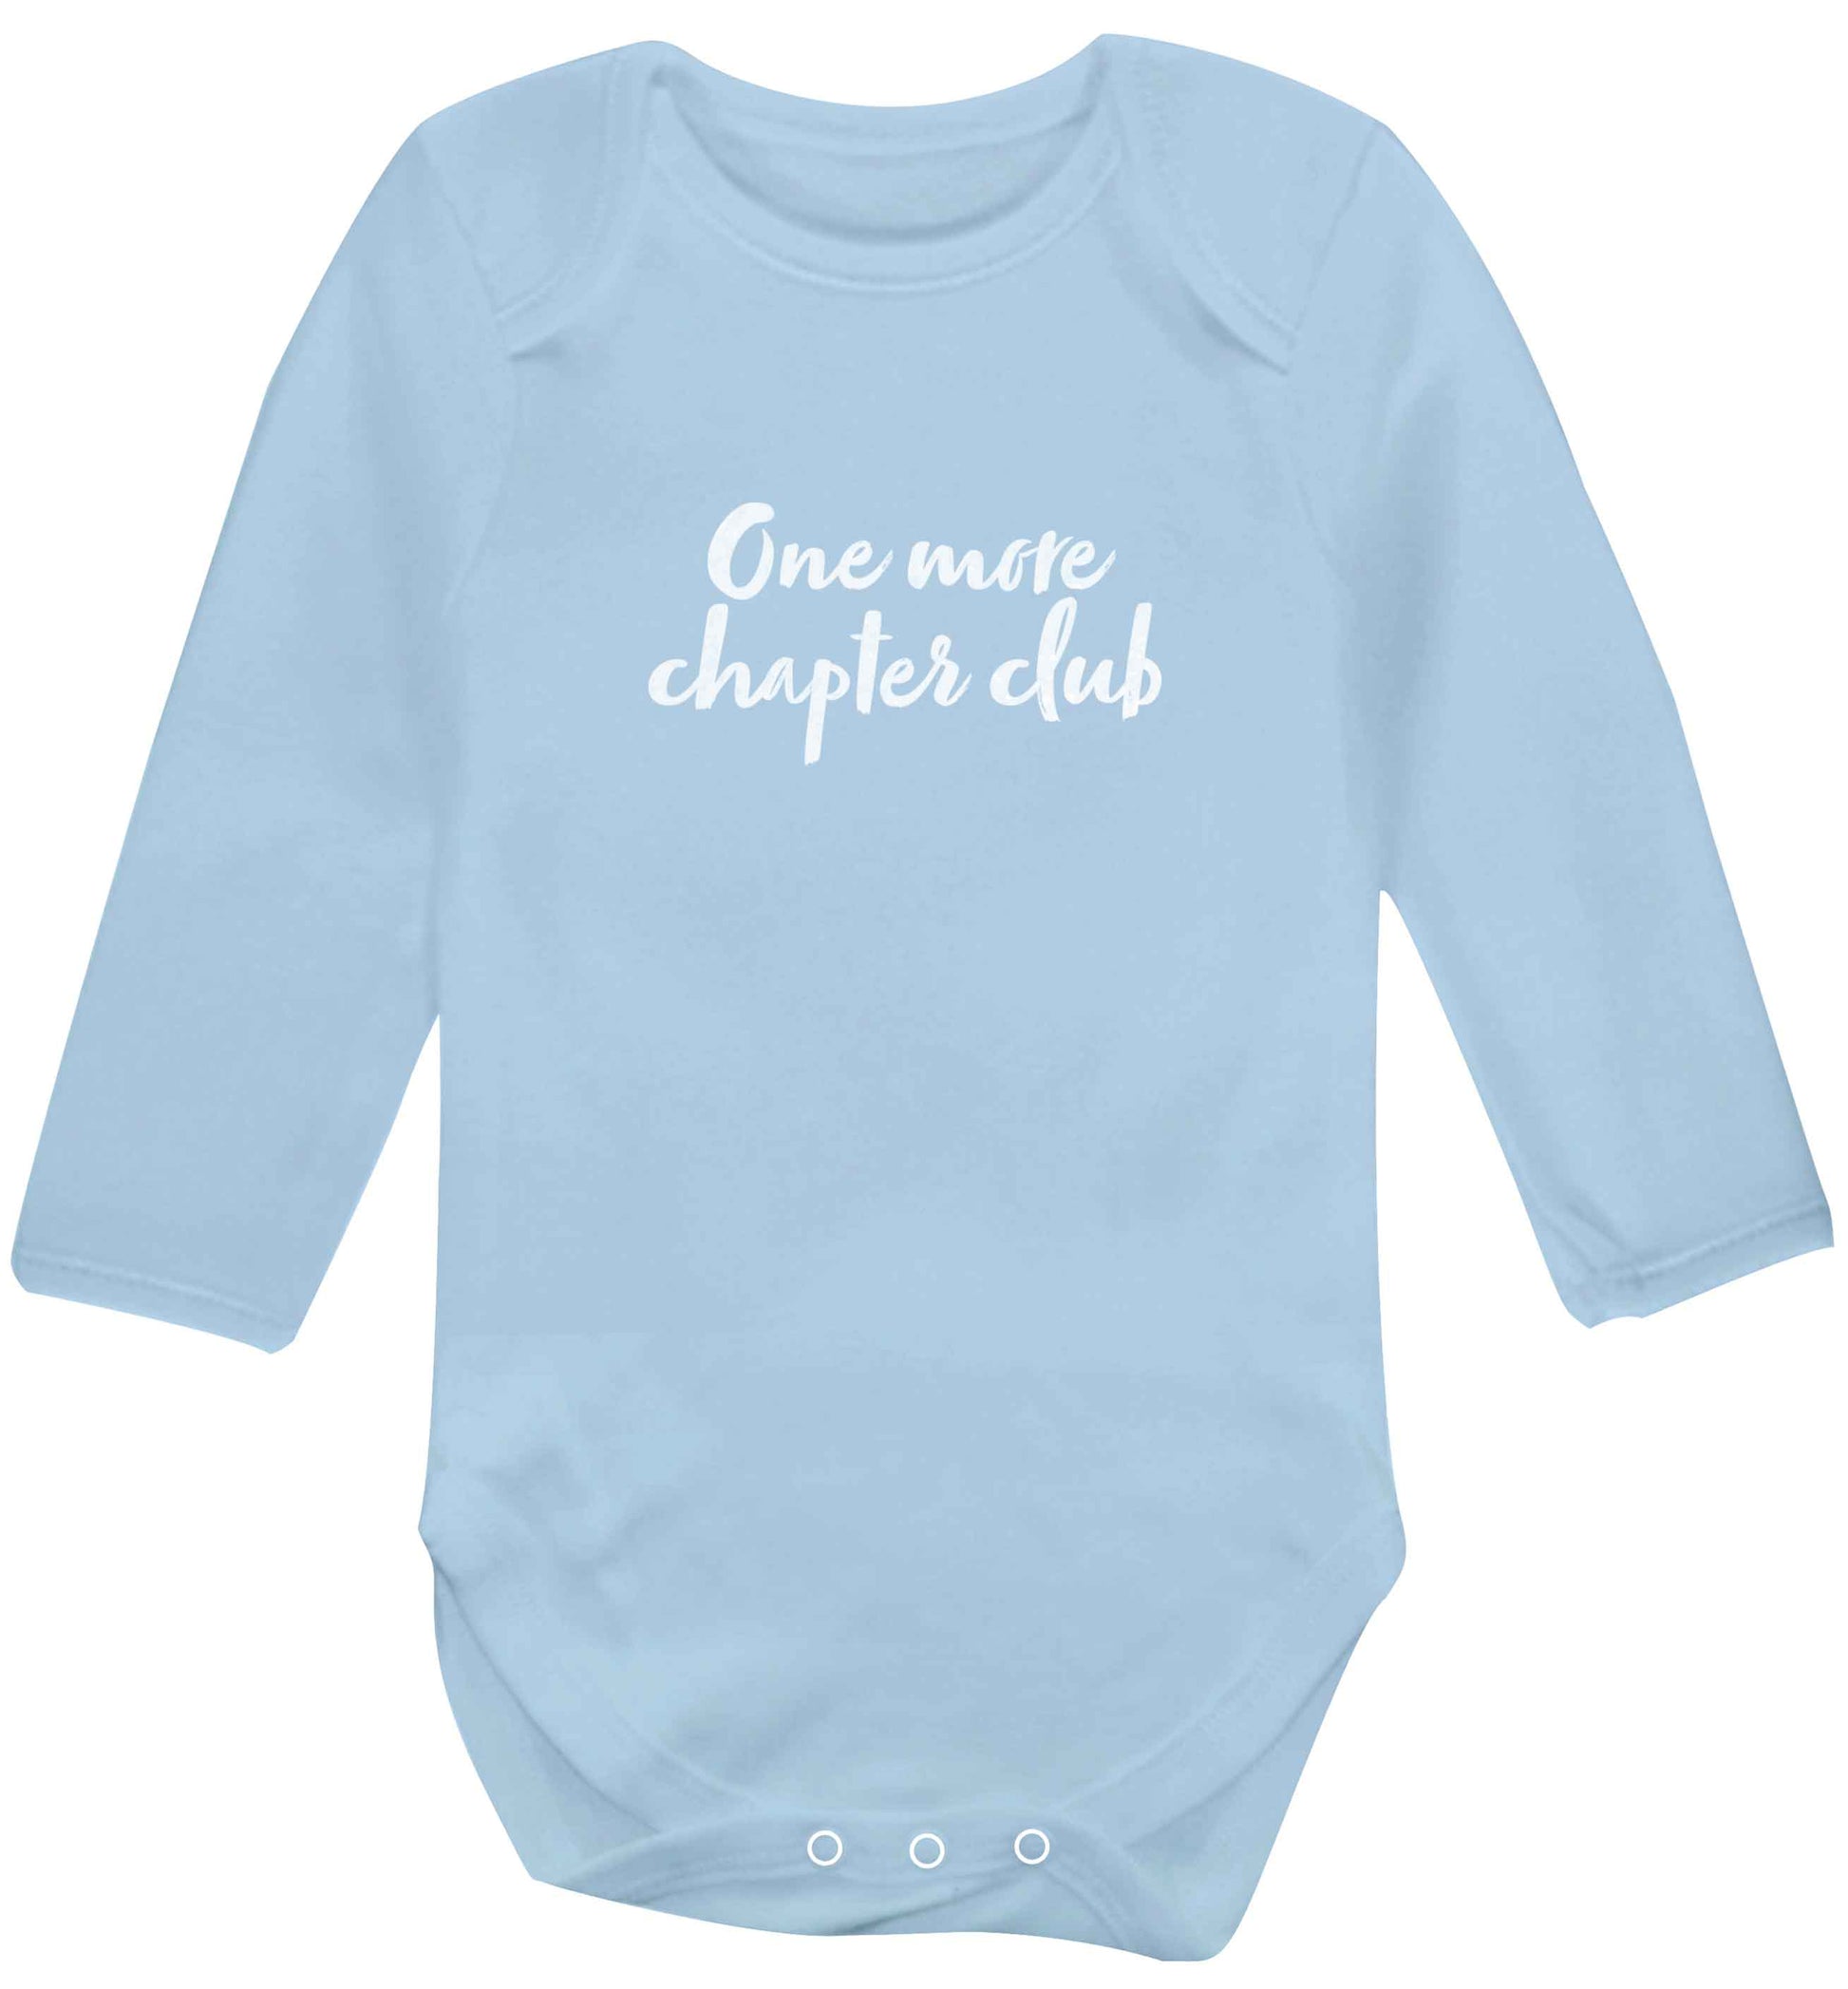 One more chapter club Kit baby vest long sleeved pale blue 6-12 months